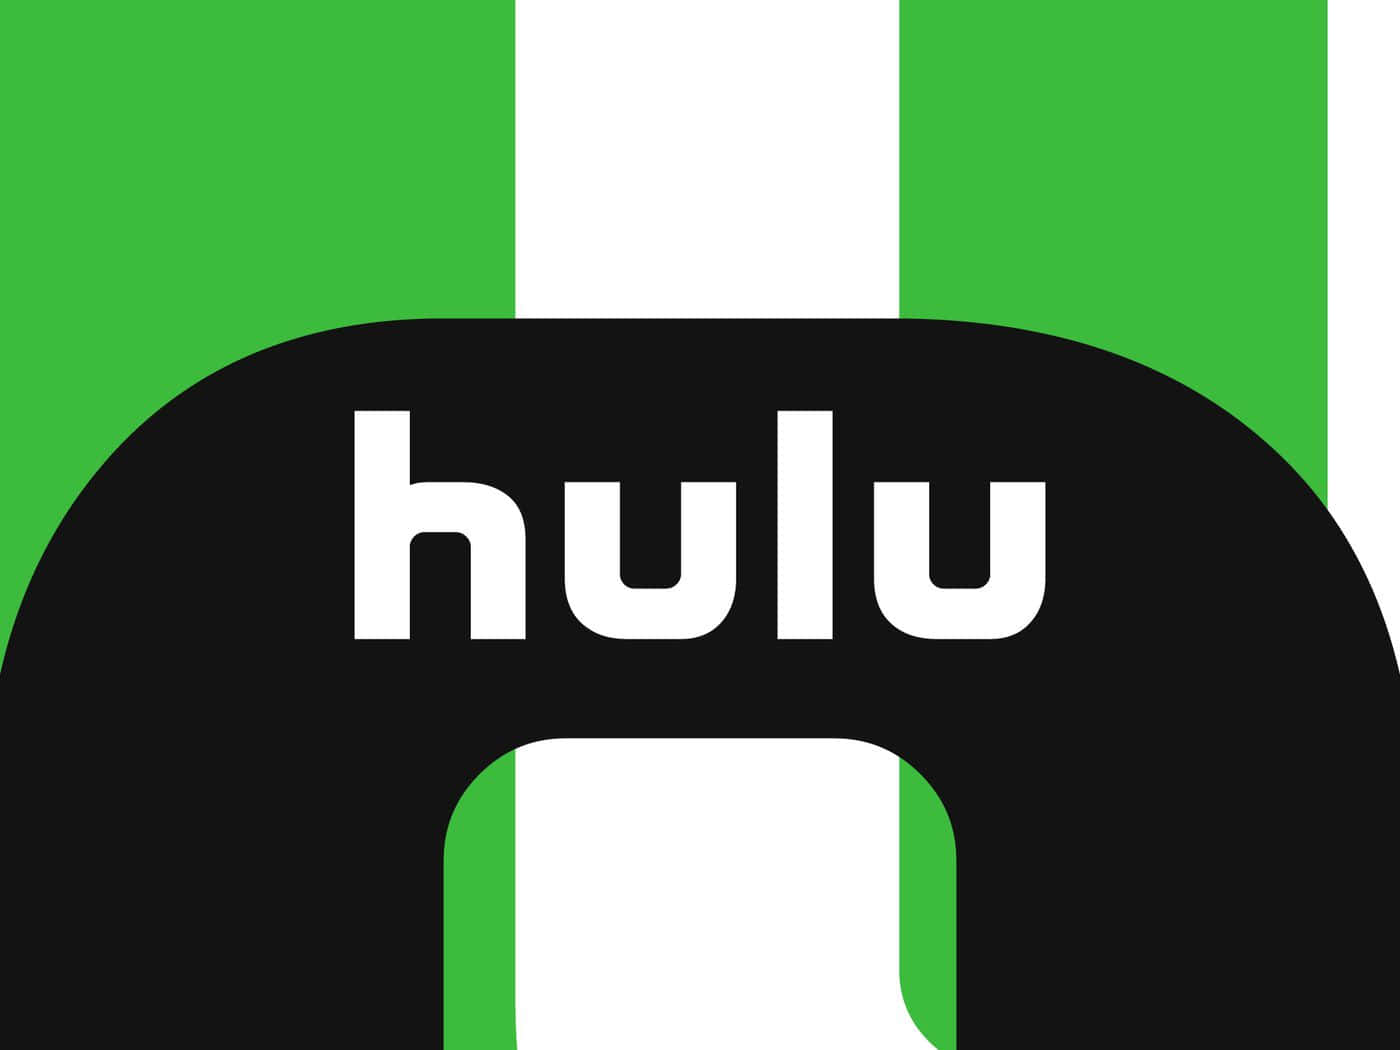 Stream your favorite shows with ease on Hulu